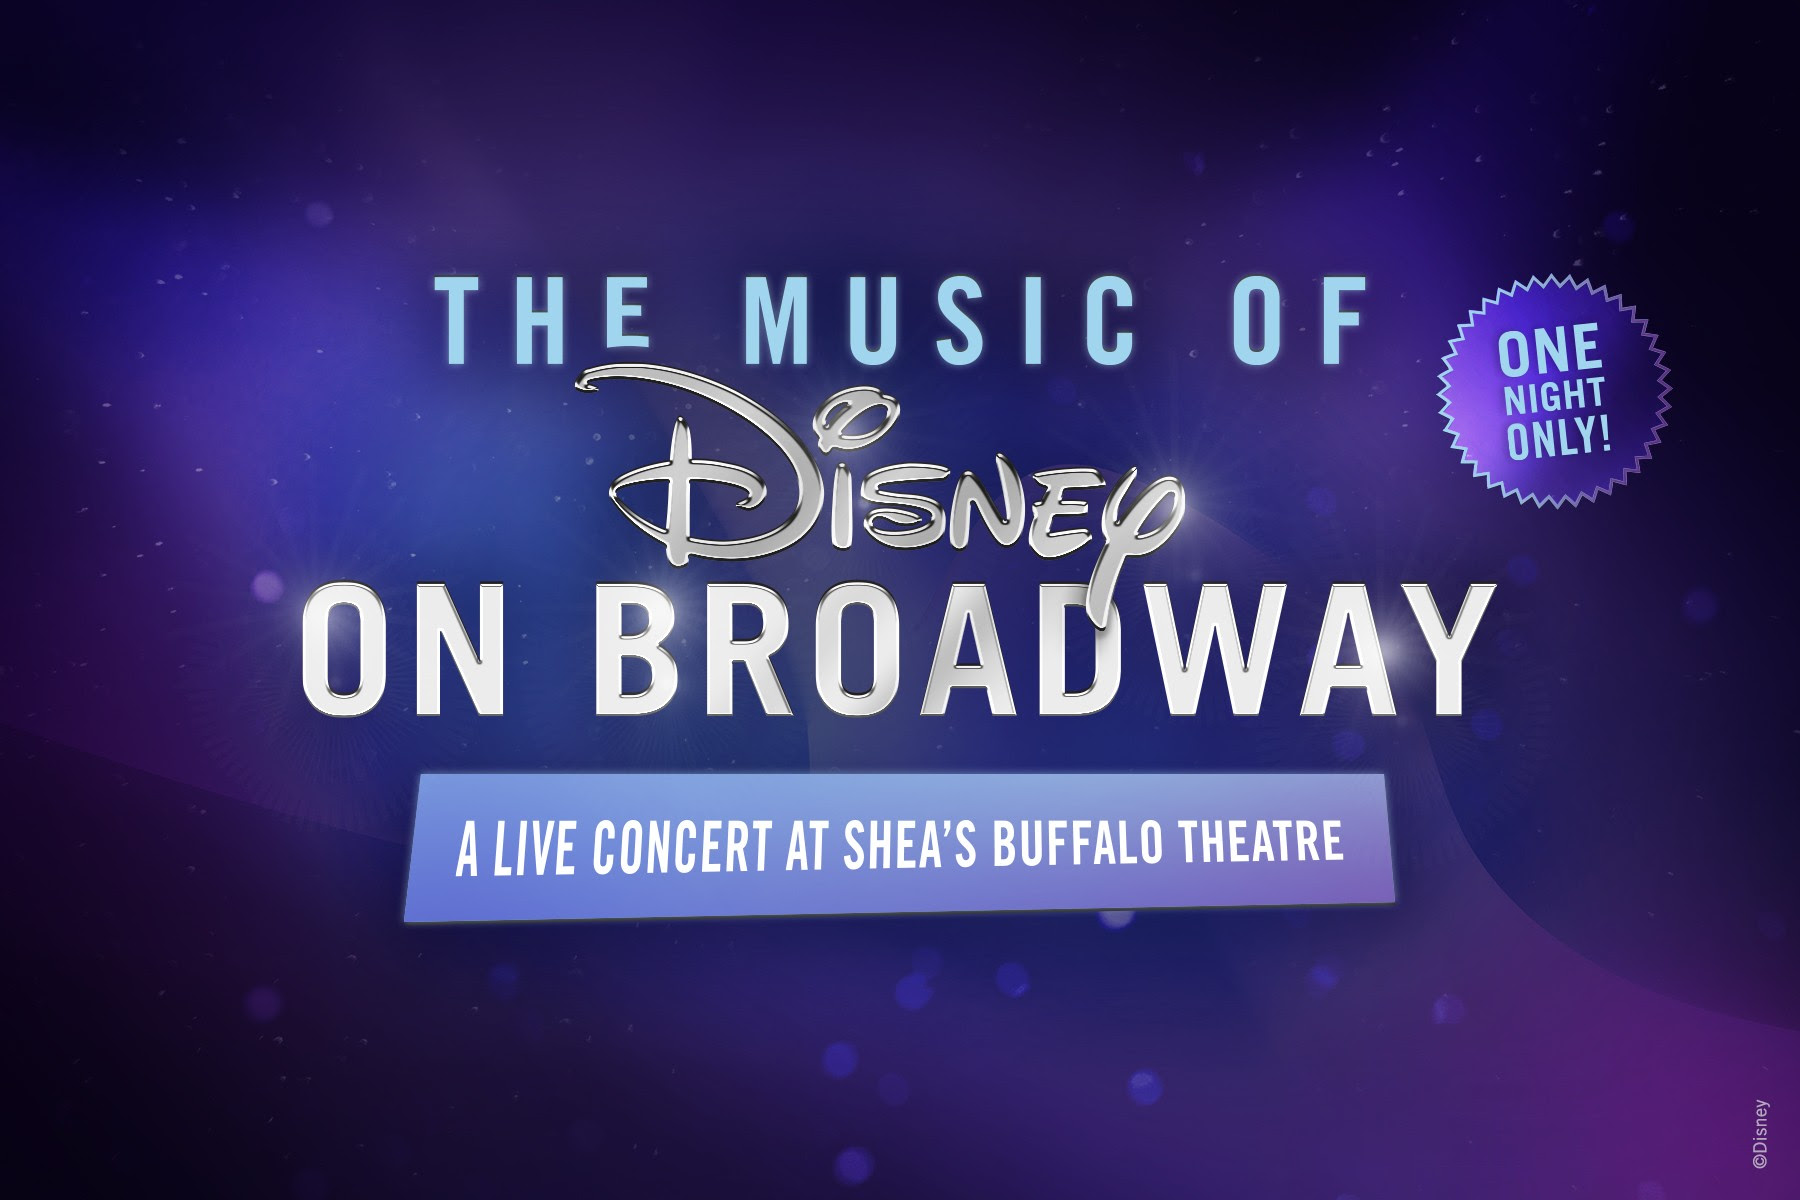 `The Music of Disney on Broadway: A Live Concert at Shea's Buffalo Theatre` celebrates beloved Disney songs. (Image provided by Shea's Performing Arts Center)